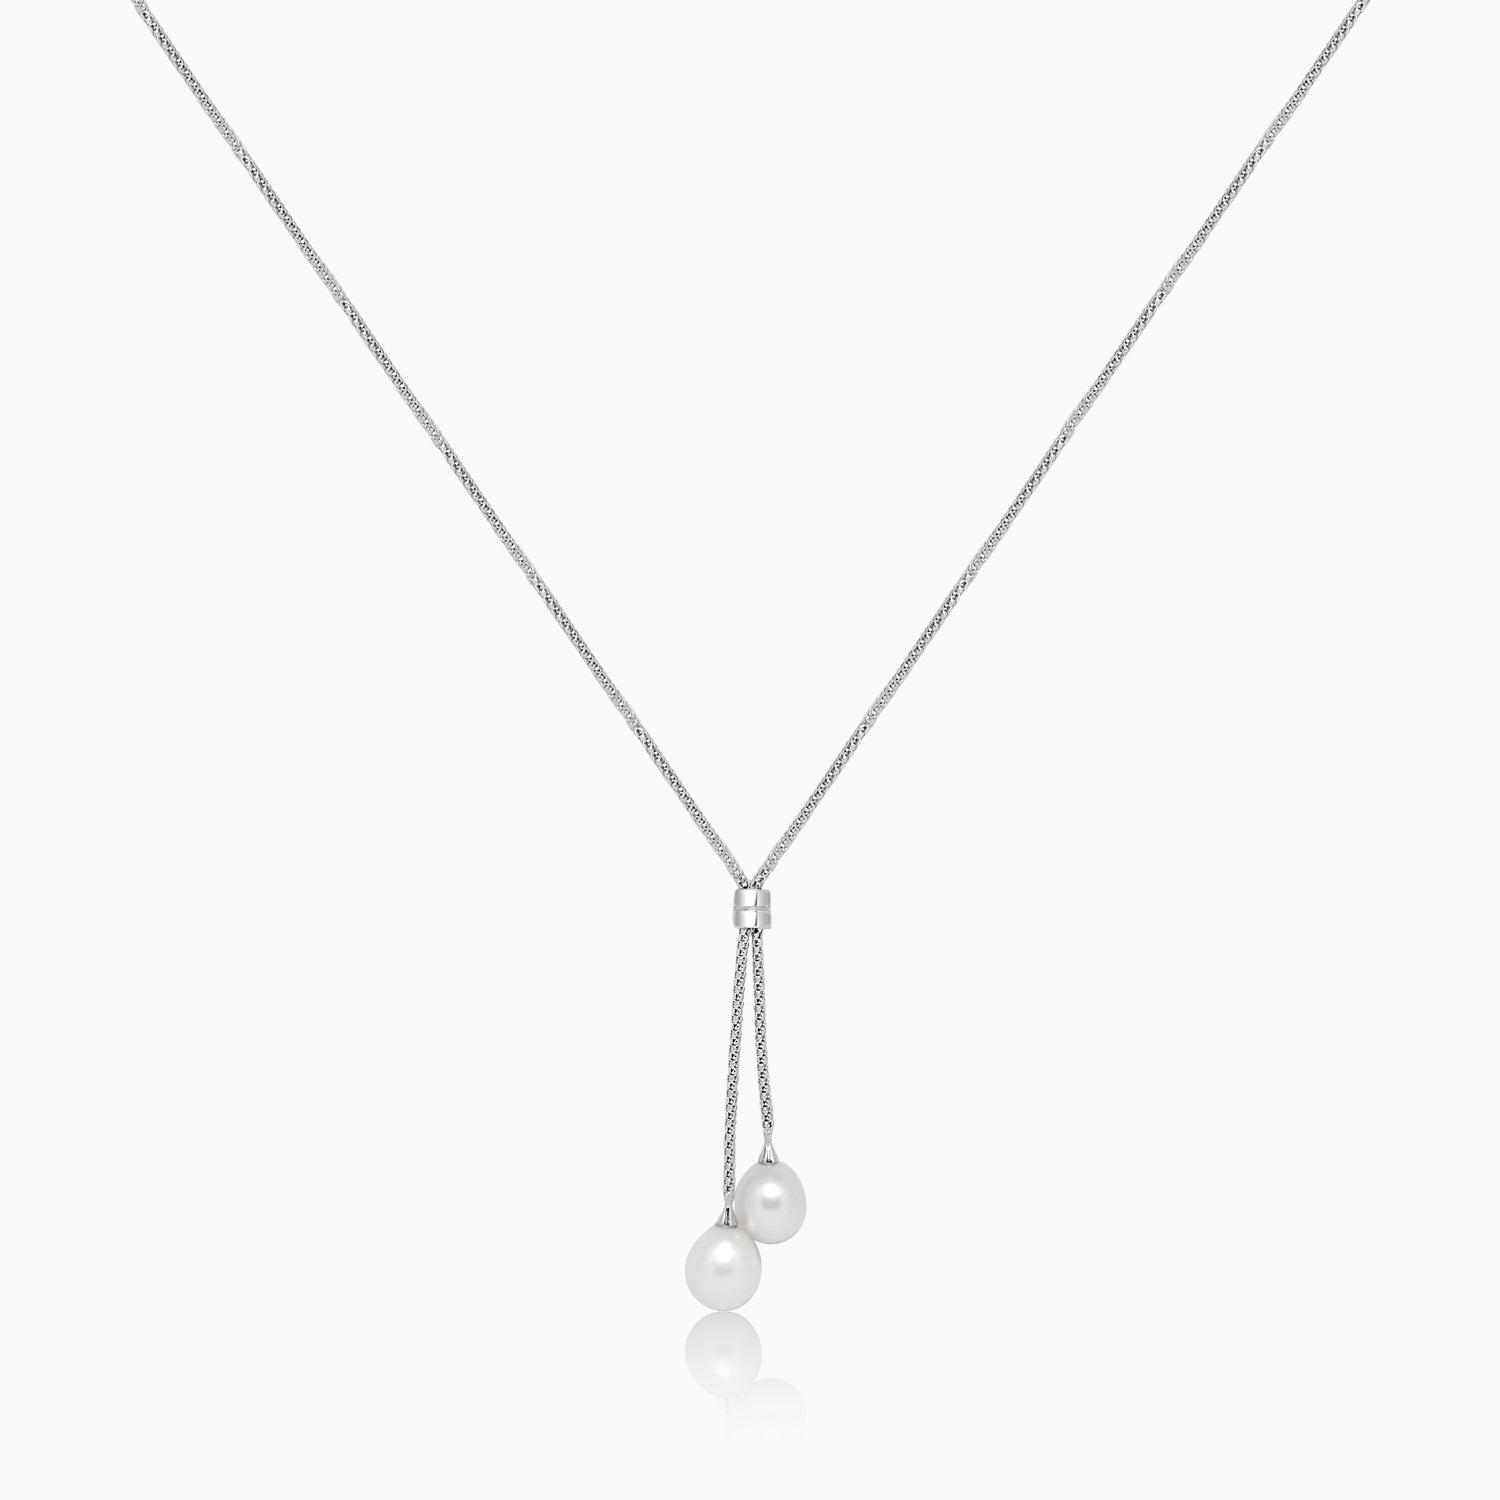 Silver Dangling Pearls on Italian Chain Necklace